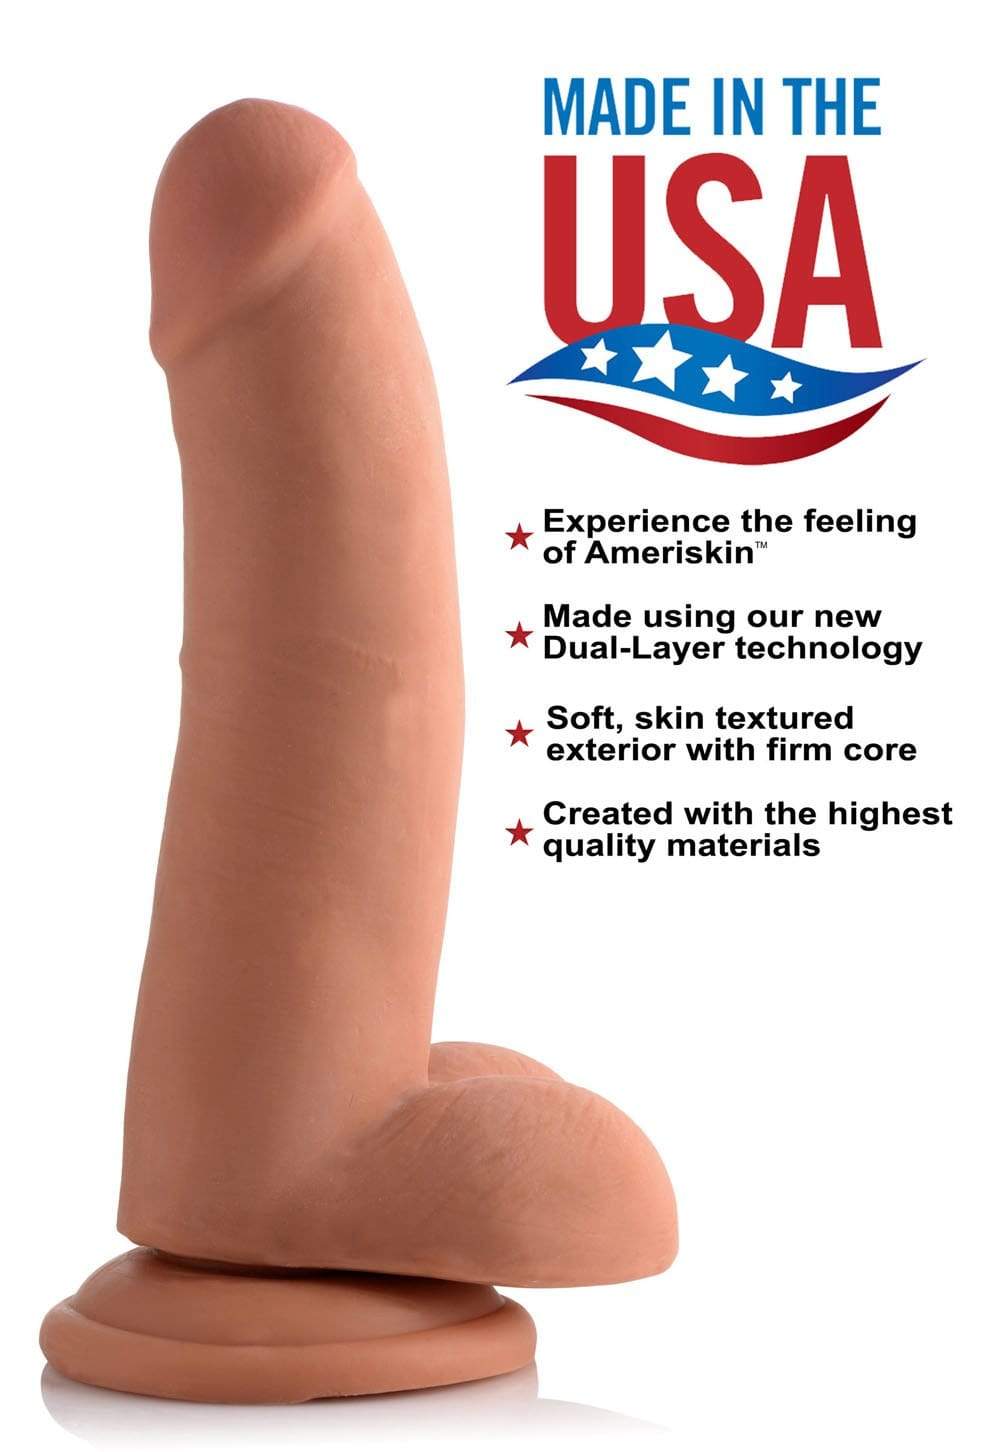 8 inch ultra real dual layer suction cup dildo medium tone skin